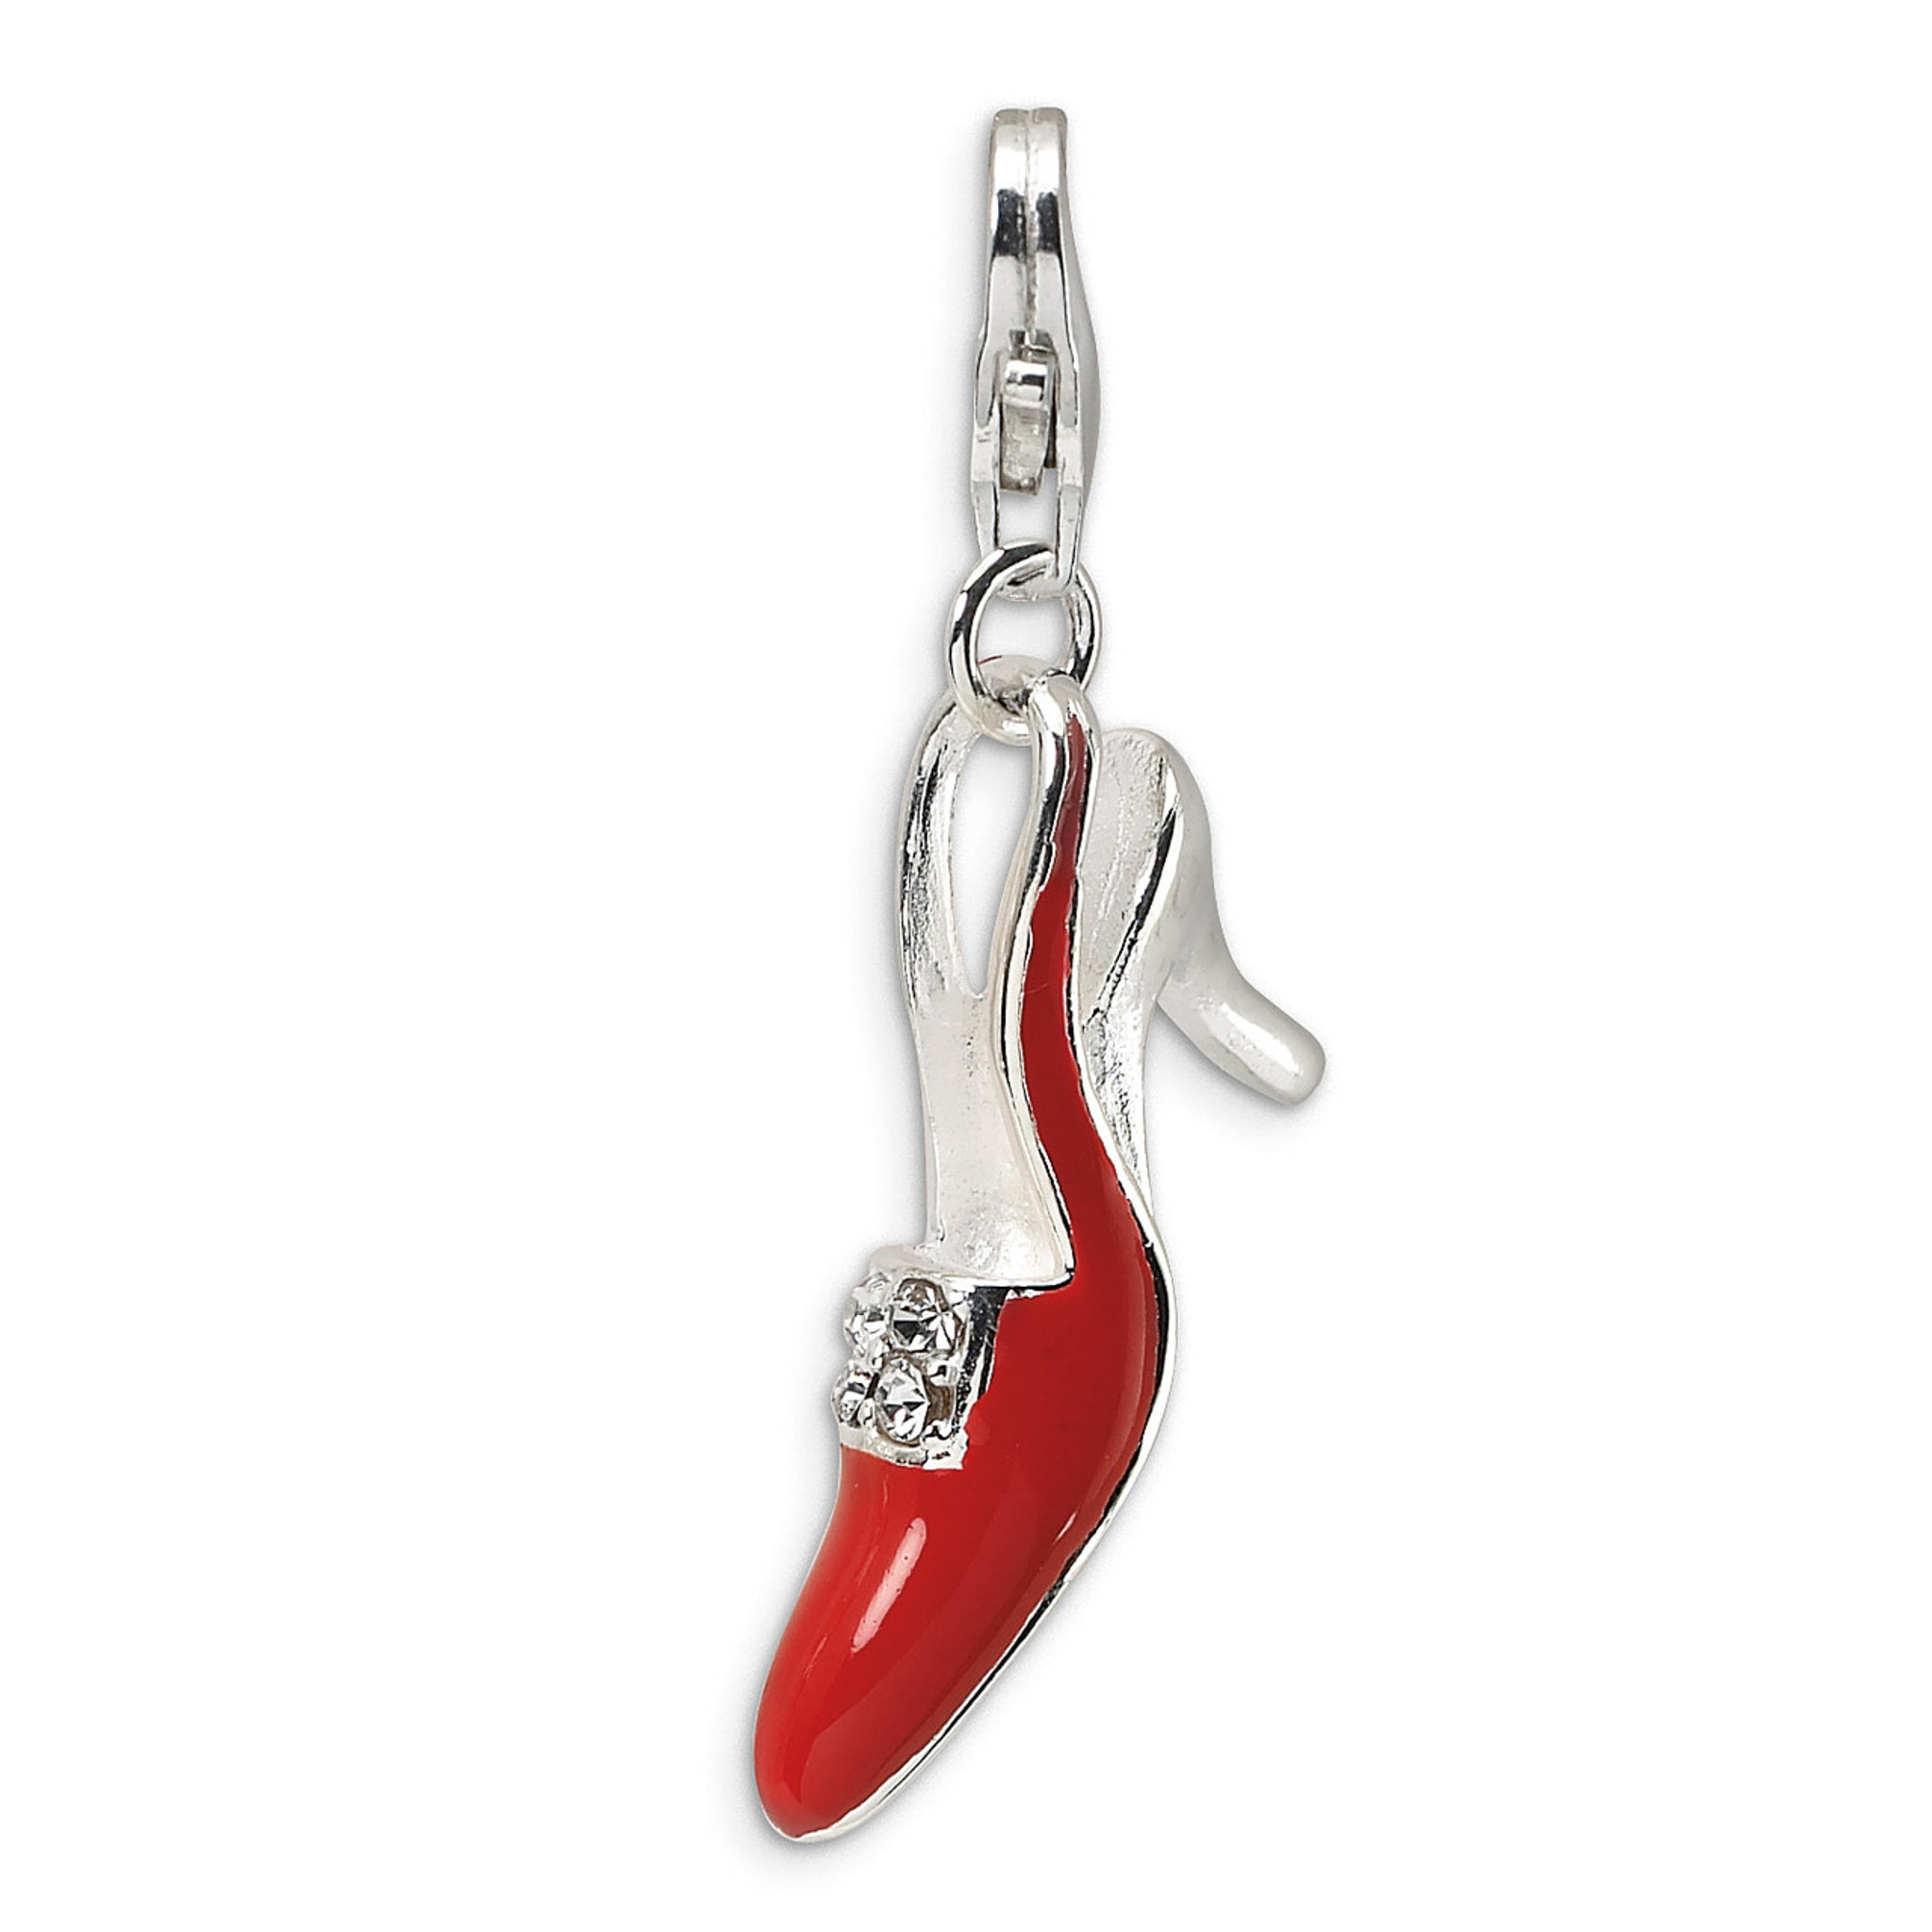 Amore La Vita Sterling Silver Enameled Red Platform High Heel with Lobster Clasp Charm 